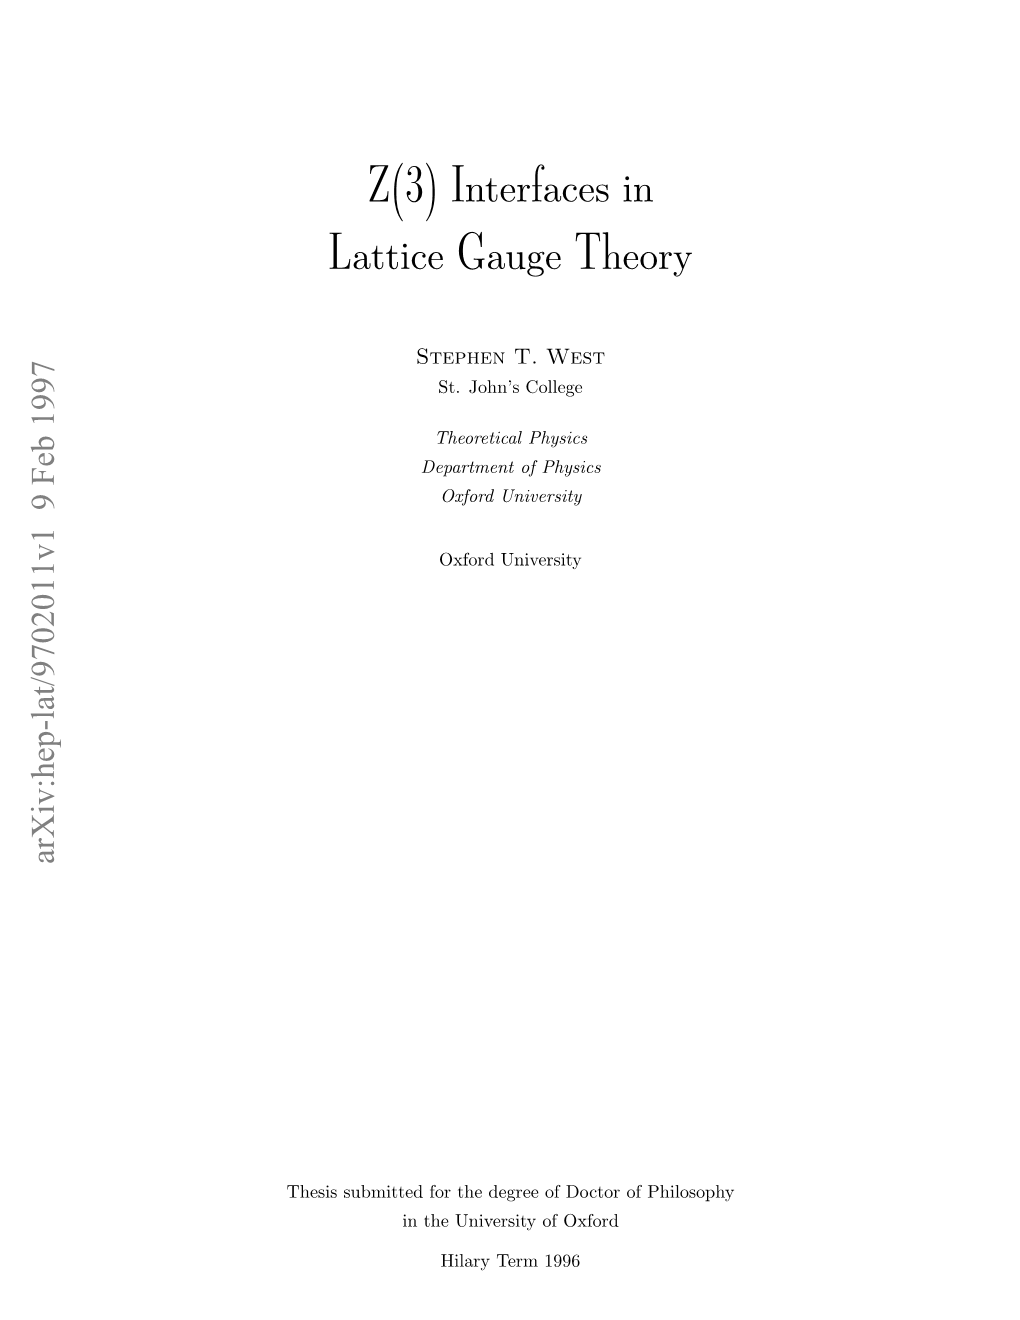 Z(3) Interfaces in Lattice Gauge Theory